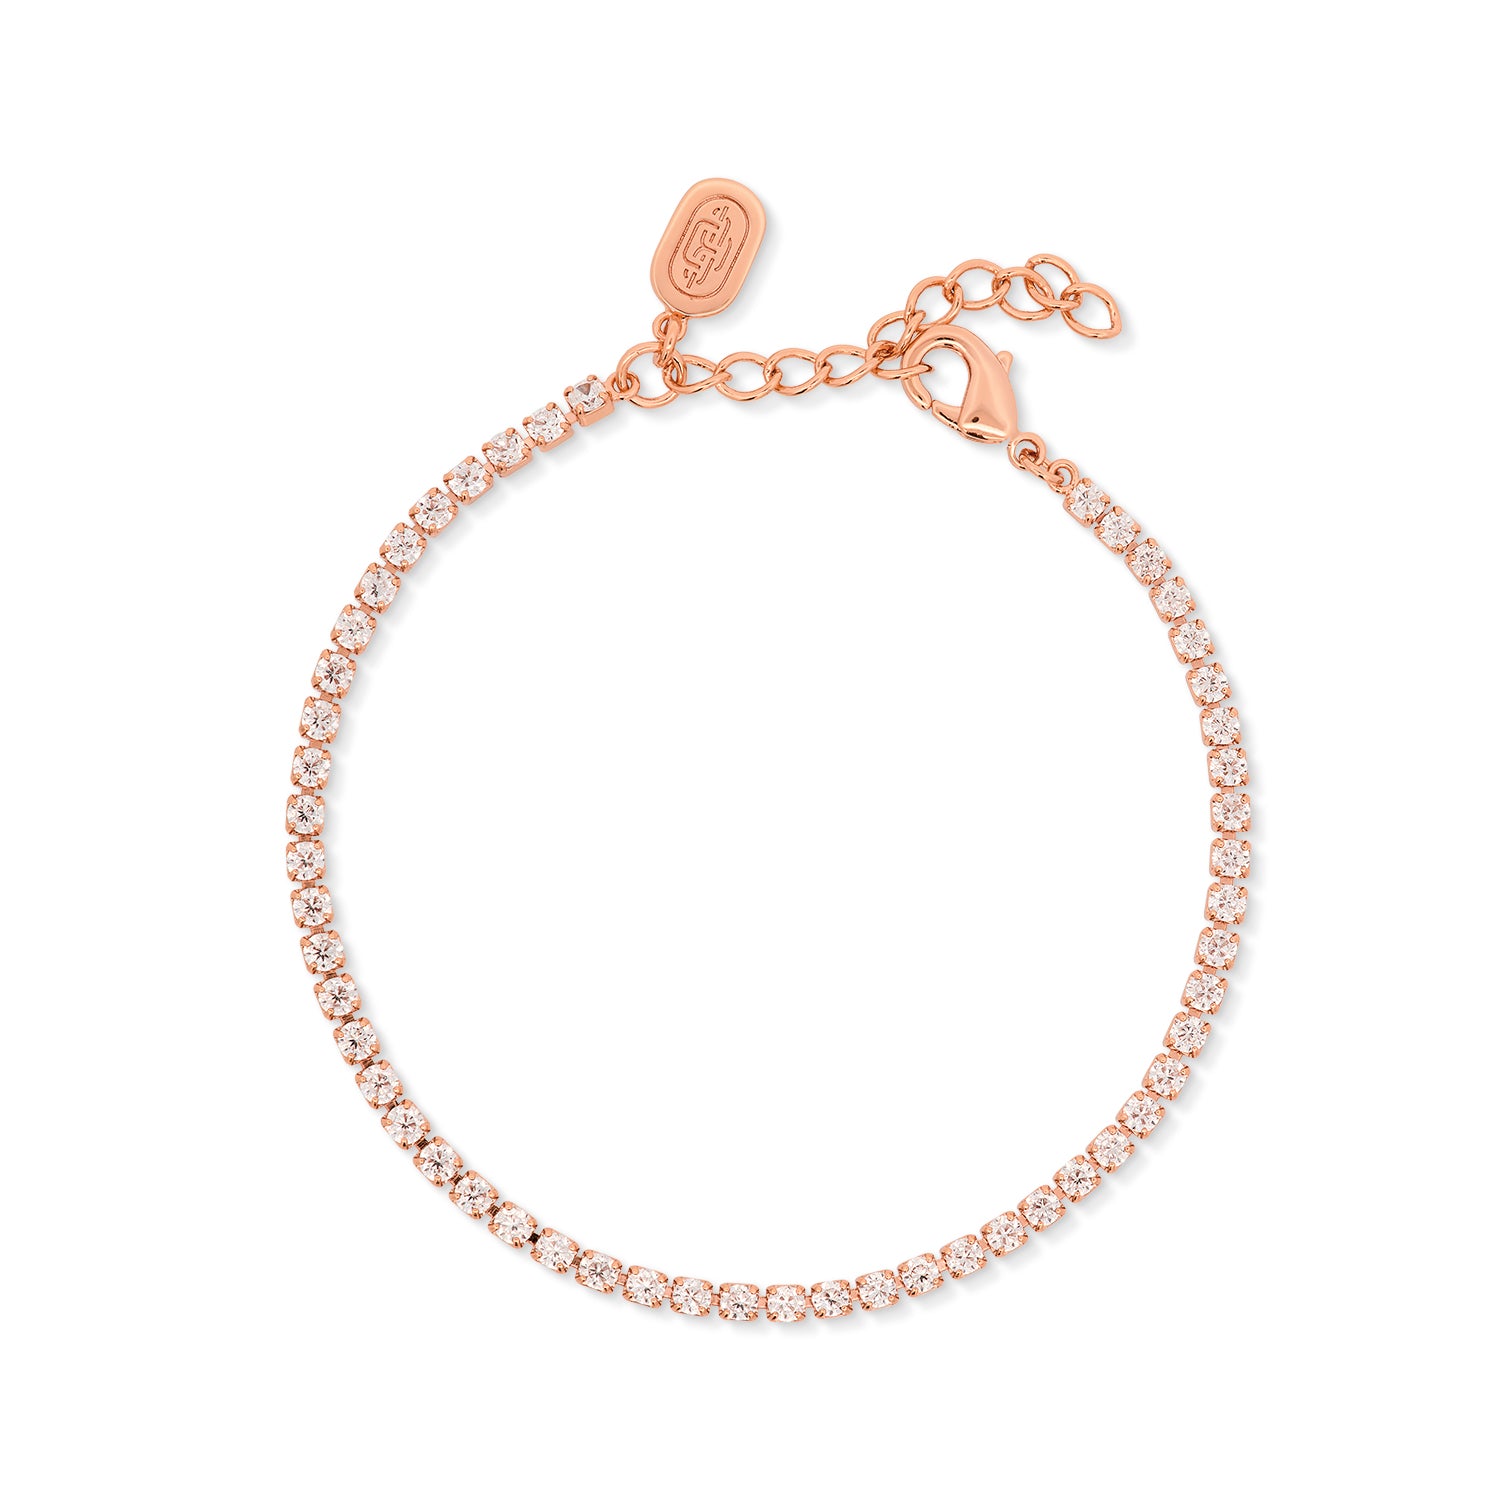 Rose Gold Tennis Bracelet – By Invite Only